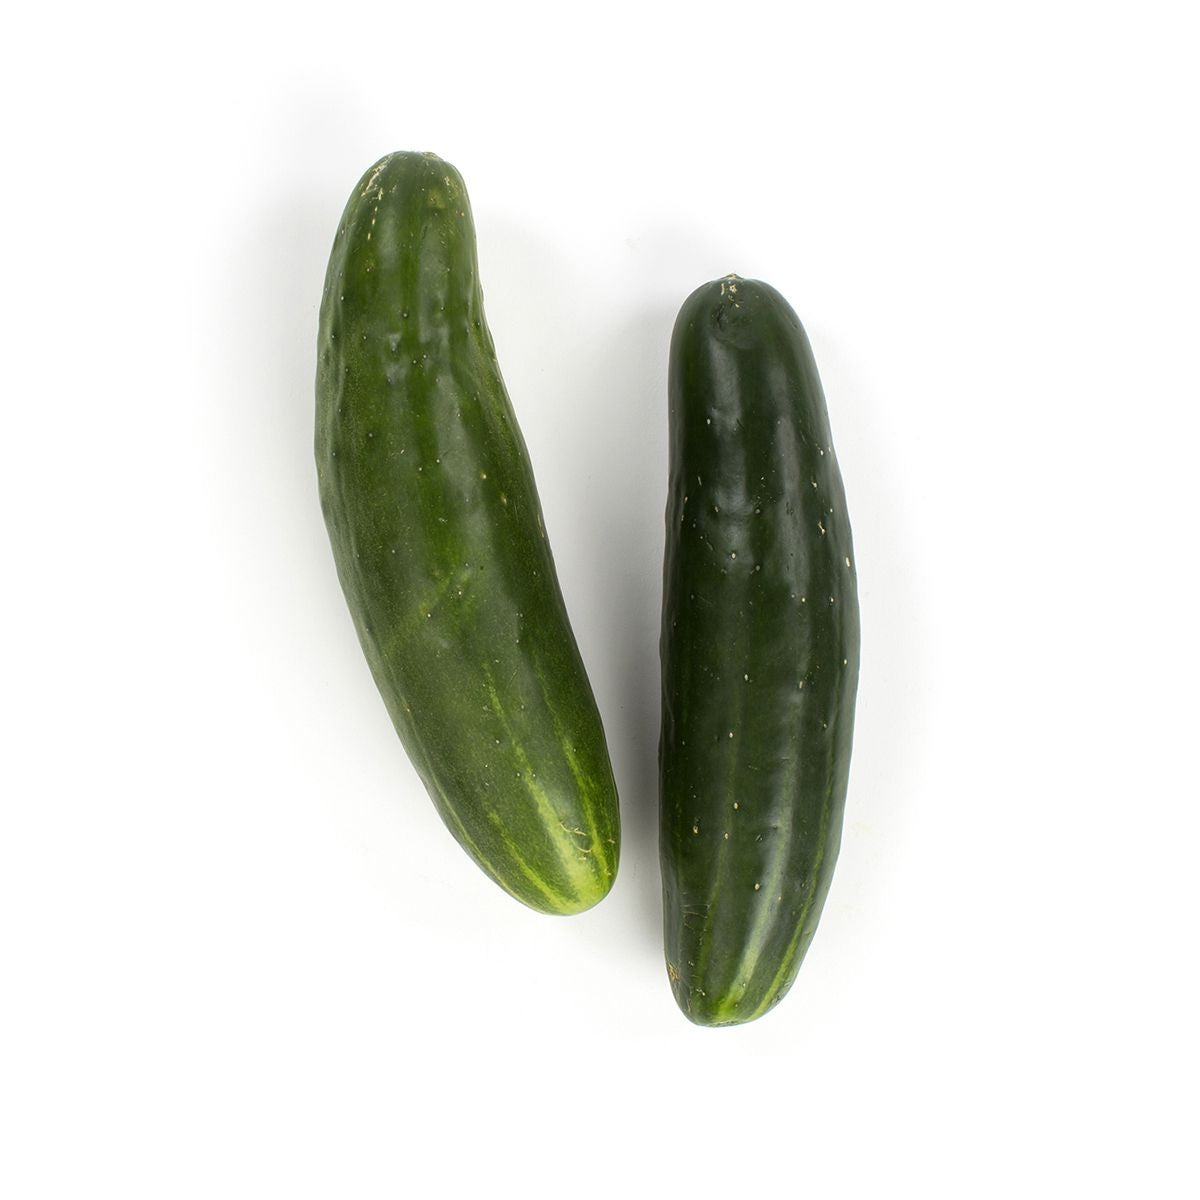 BoxNCase Select Cucumbers